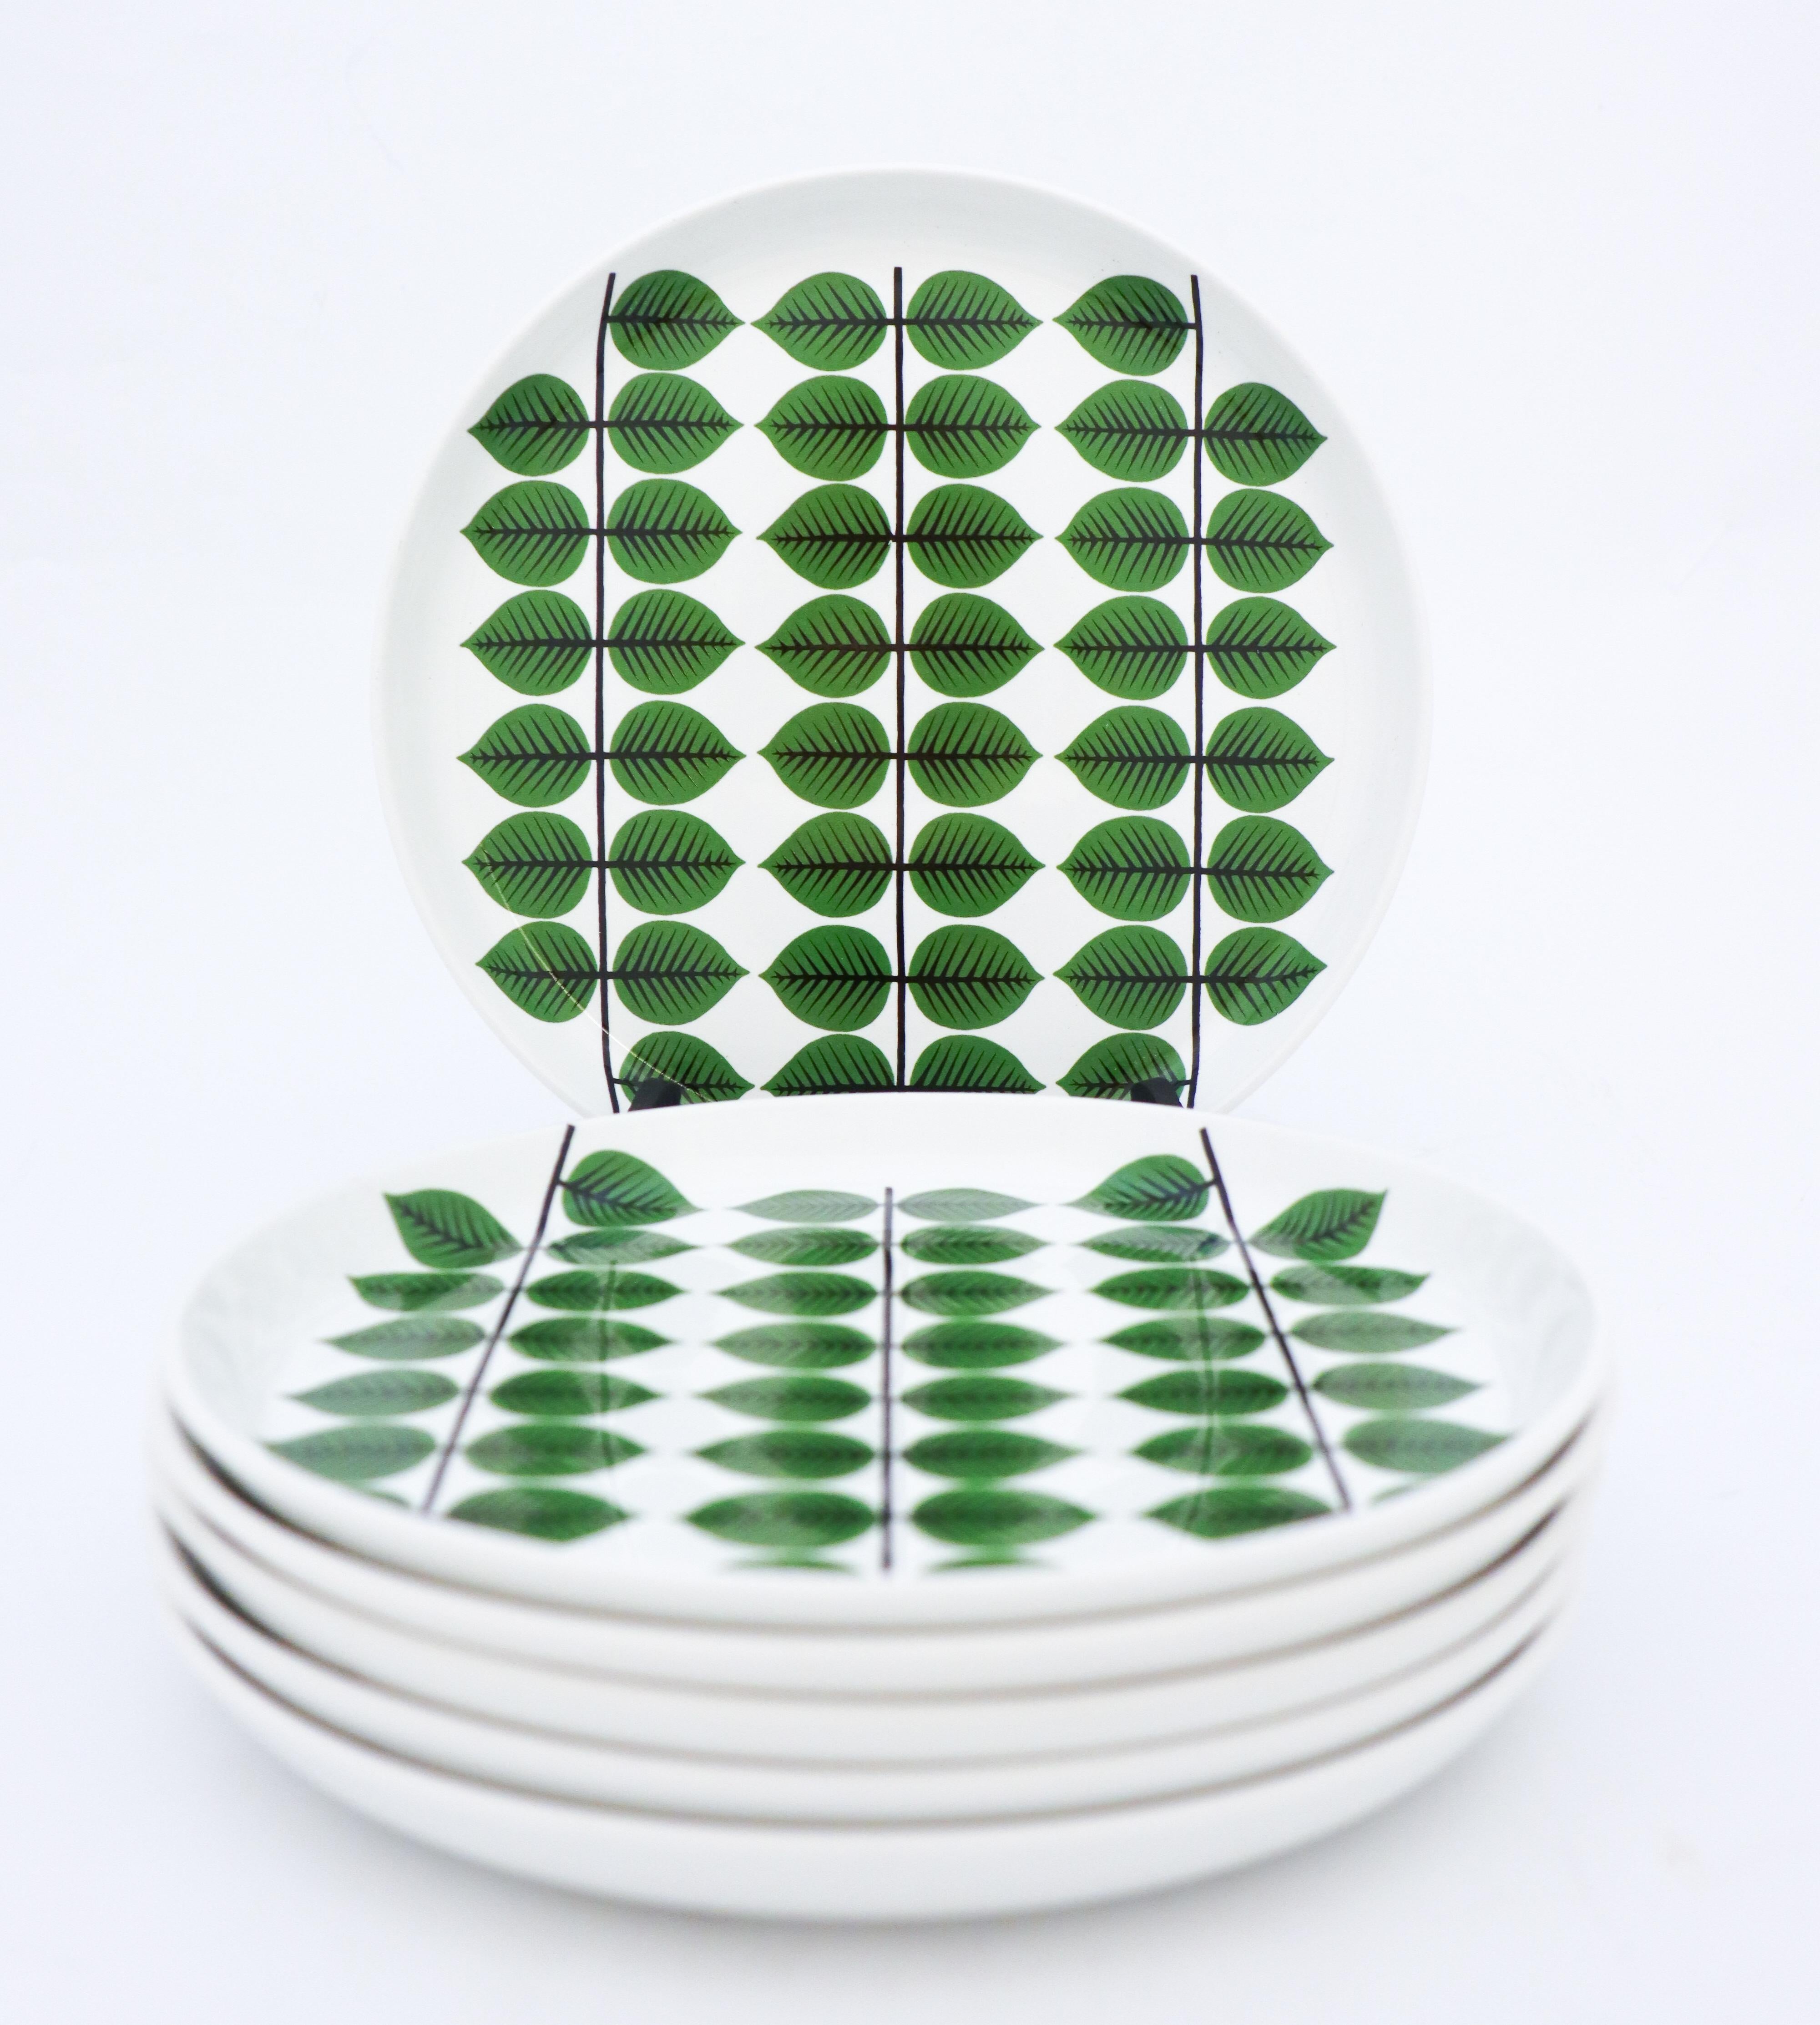 6 luncheon plates in porcelain in the very famous pattern Berså designed by Stig Lindberg at Gustavsberg. They are 21.5 cm in diameter. They are in very good condition, looks like they never have been used, they have some minor marks from the